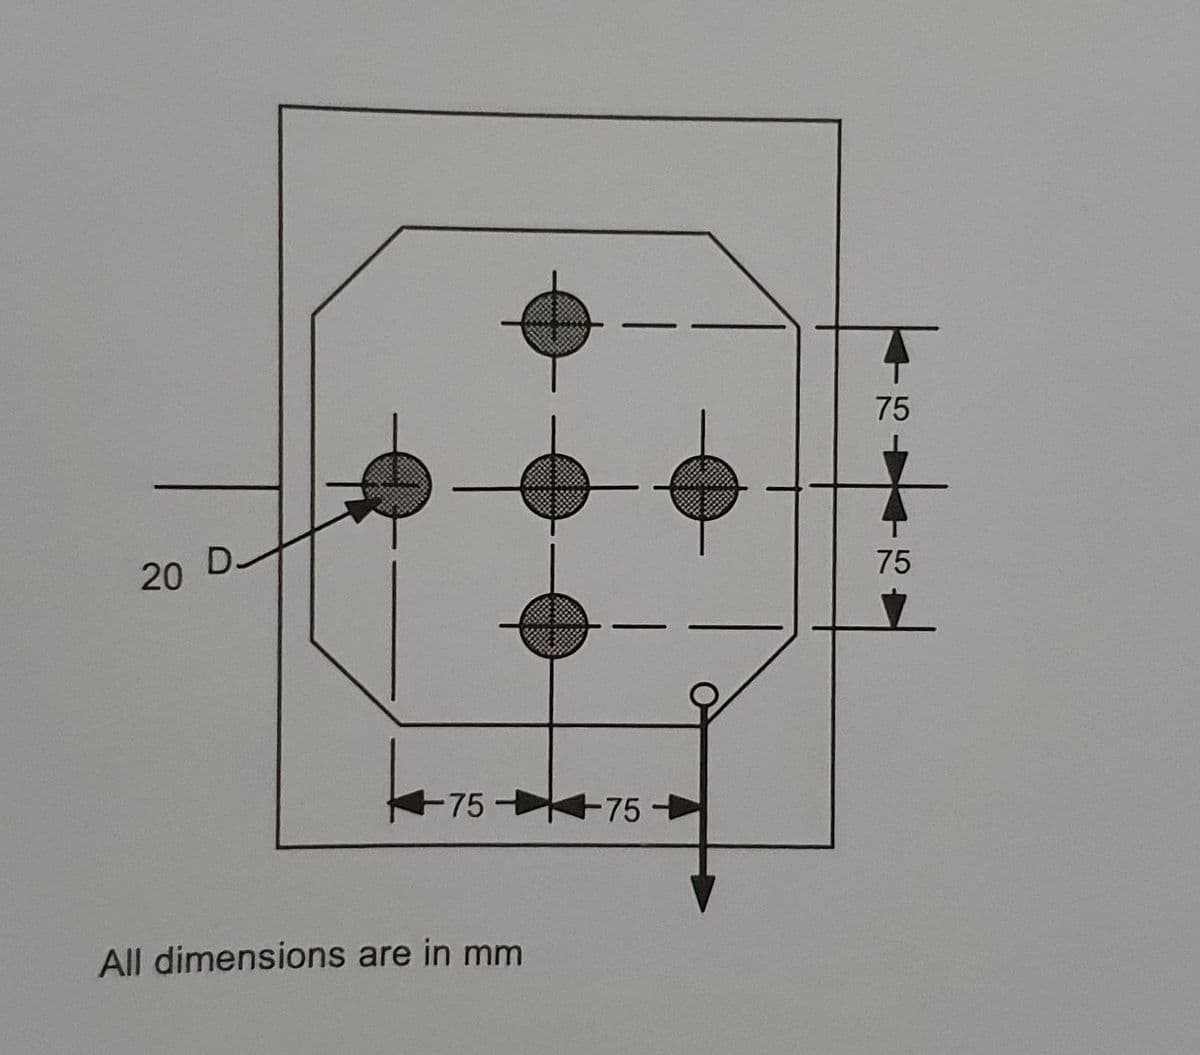 75
20 D-
75
-75-
75
All dimensions are in mm
